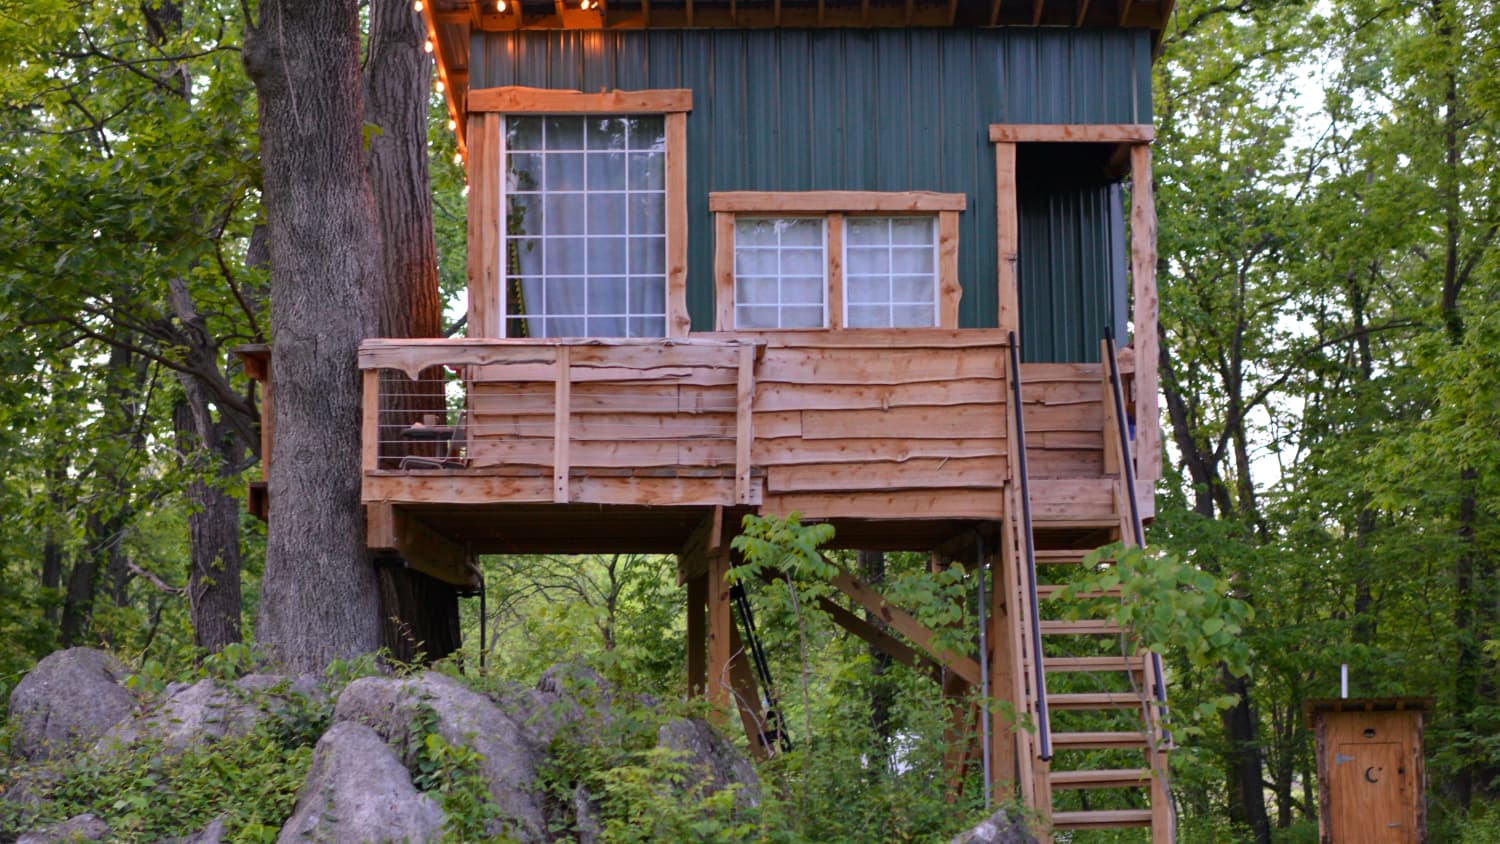 Hand Built Tree House | Apartment Therapy